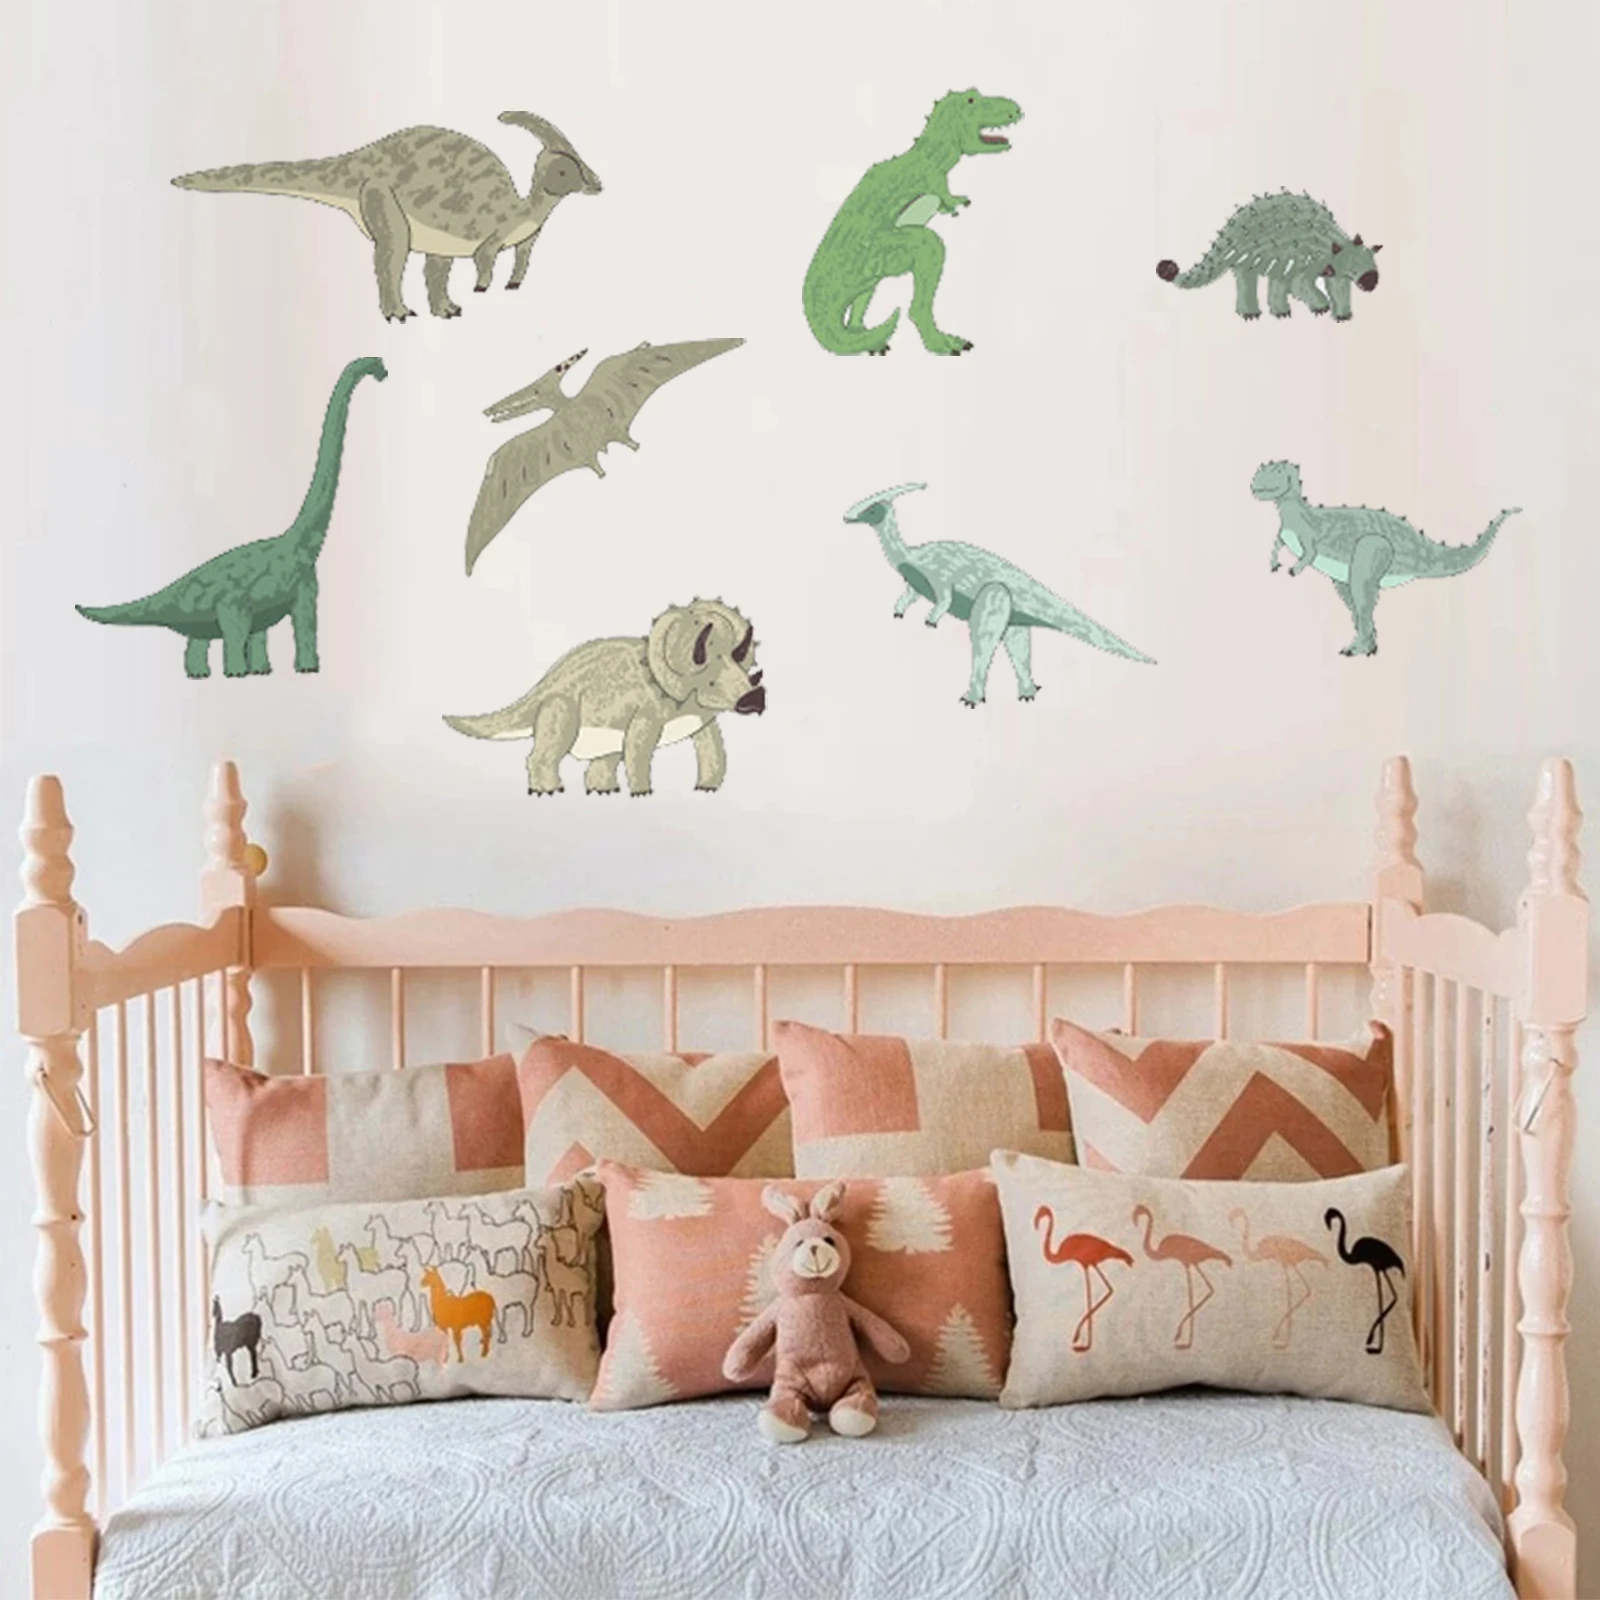 Various Dinosaur Wall Stickers For Kids Room Wall Decor Cartoon Dinosaur Wall Decals Removable Art Murals For Home Decoration images - 6